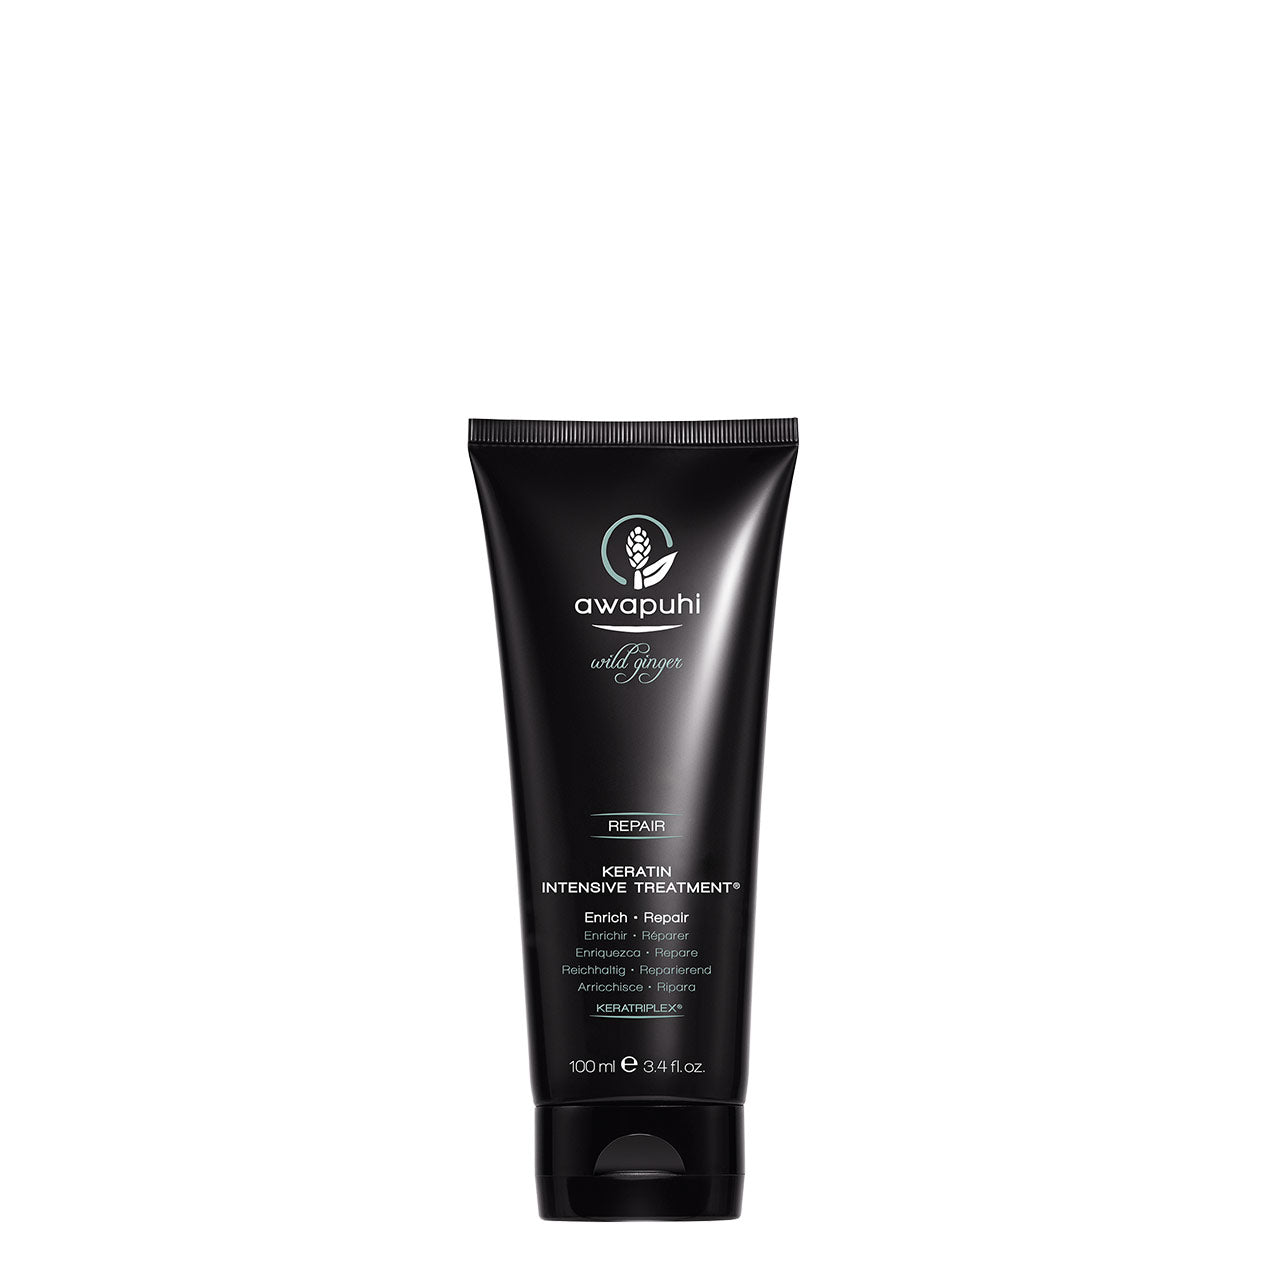 Awapuhi Wild Ginger Repair Keratin Intensive Treatment - 100ML - by Paul Mitchell |ProCare Outlet|